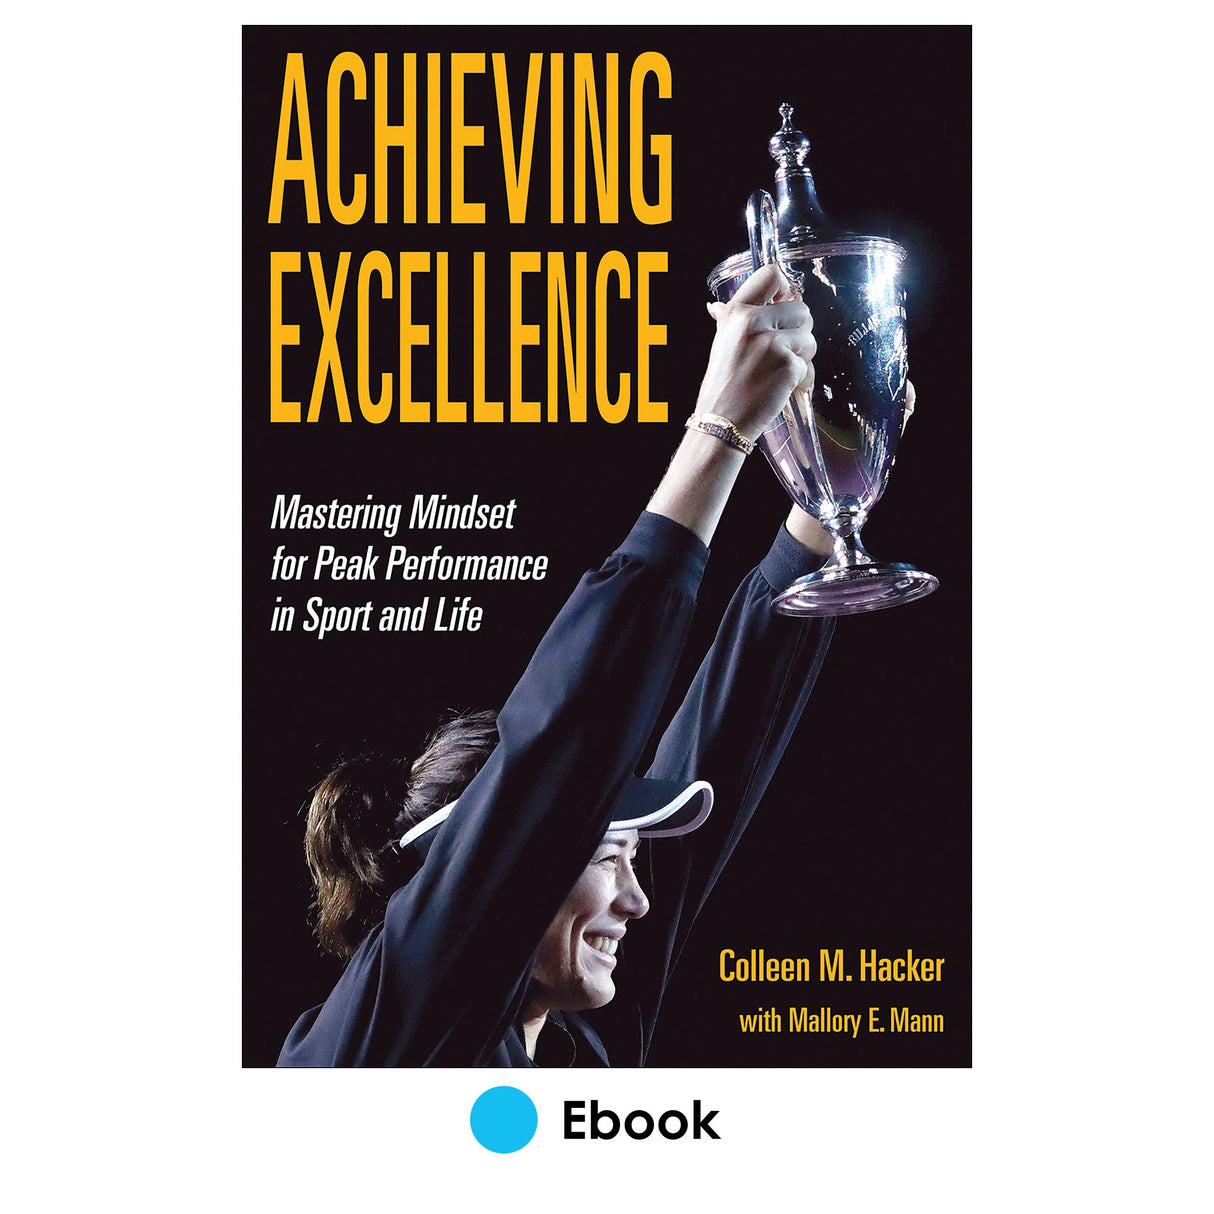 Achieving Excellence Ebook